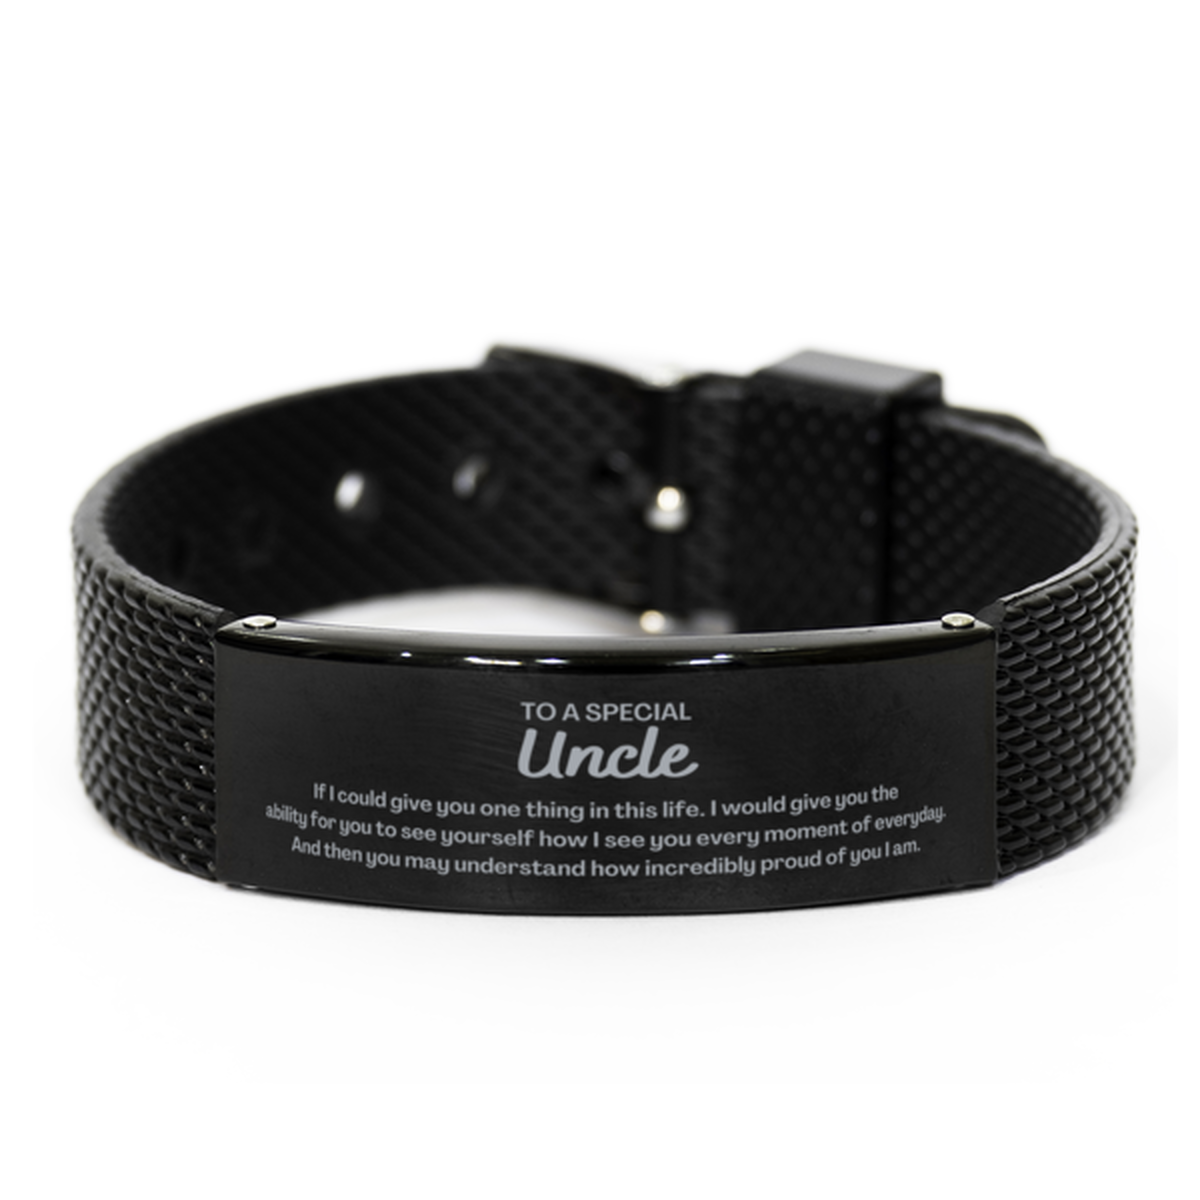 To My Uncle Black Shark Mesh Bracelet, Gifts For Uncle Engraved, Inspirational Gifts for Christmas Birthday, Epic Gifts for Uncle To A Special Uncle how incredibly proud of you I am